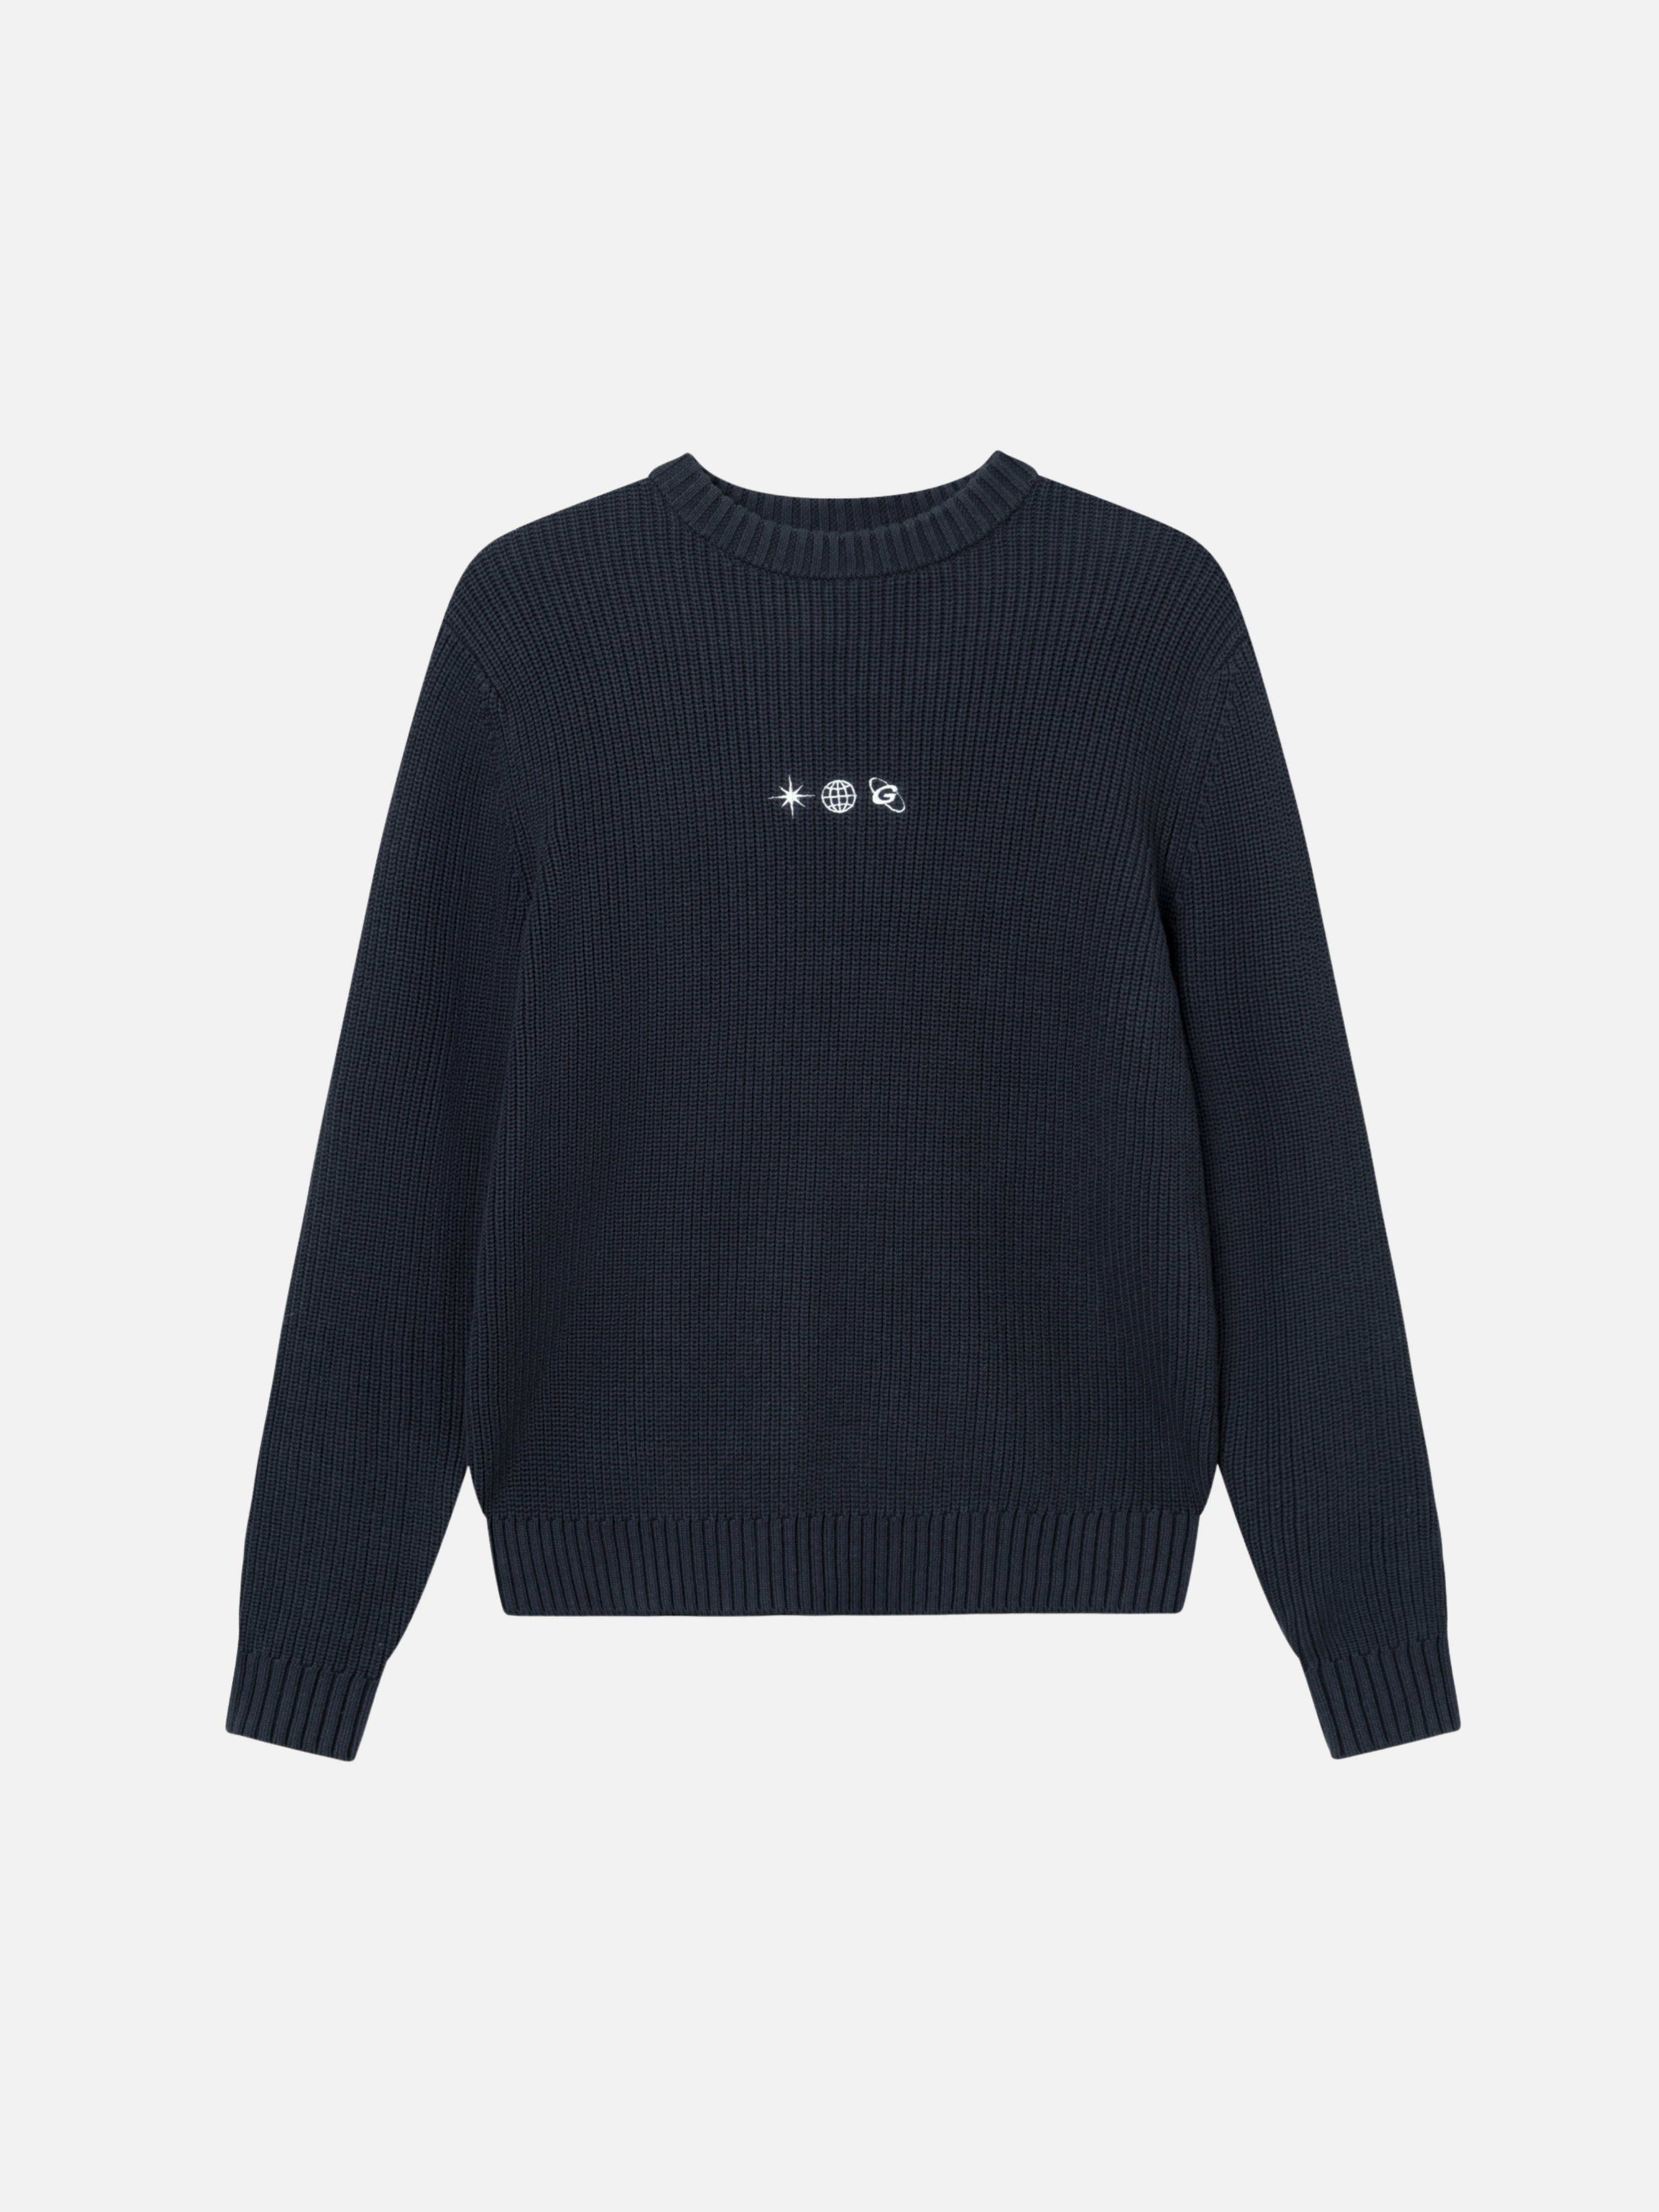 Icons Sweater Navy (Globe club campaign)